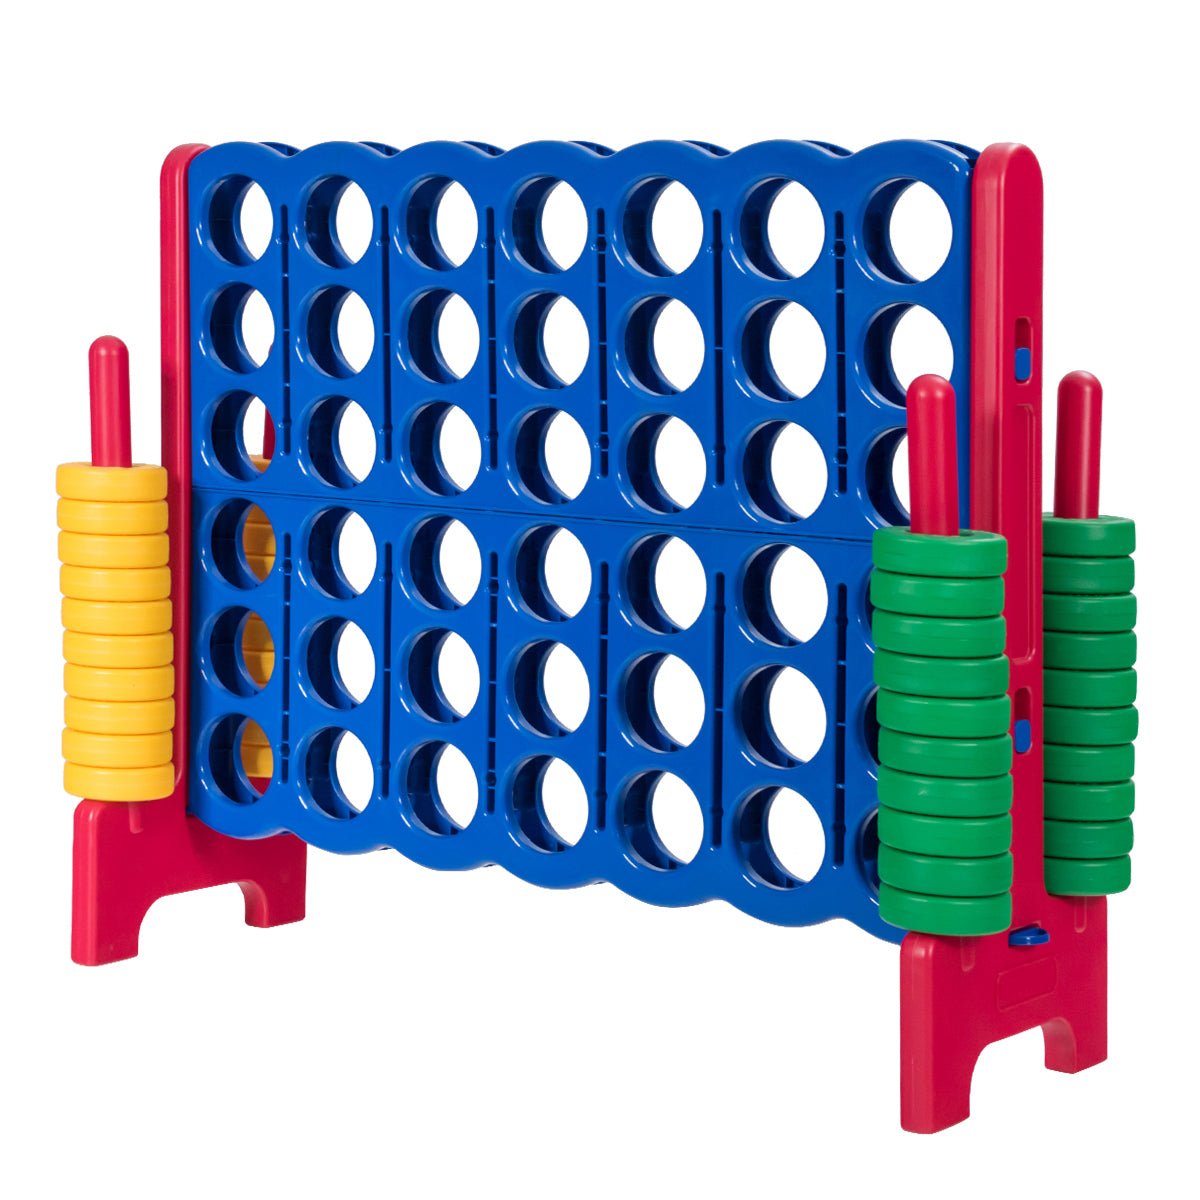 Giant Connect 4 Game - 42 Jumbo Rings for Outdoor Fun in Red